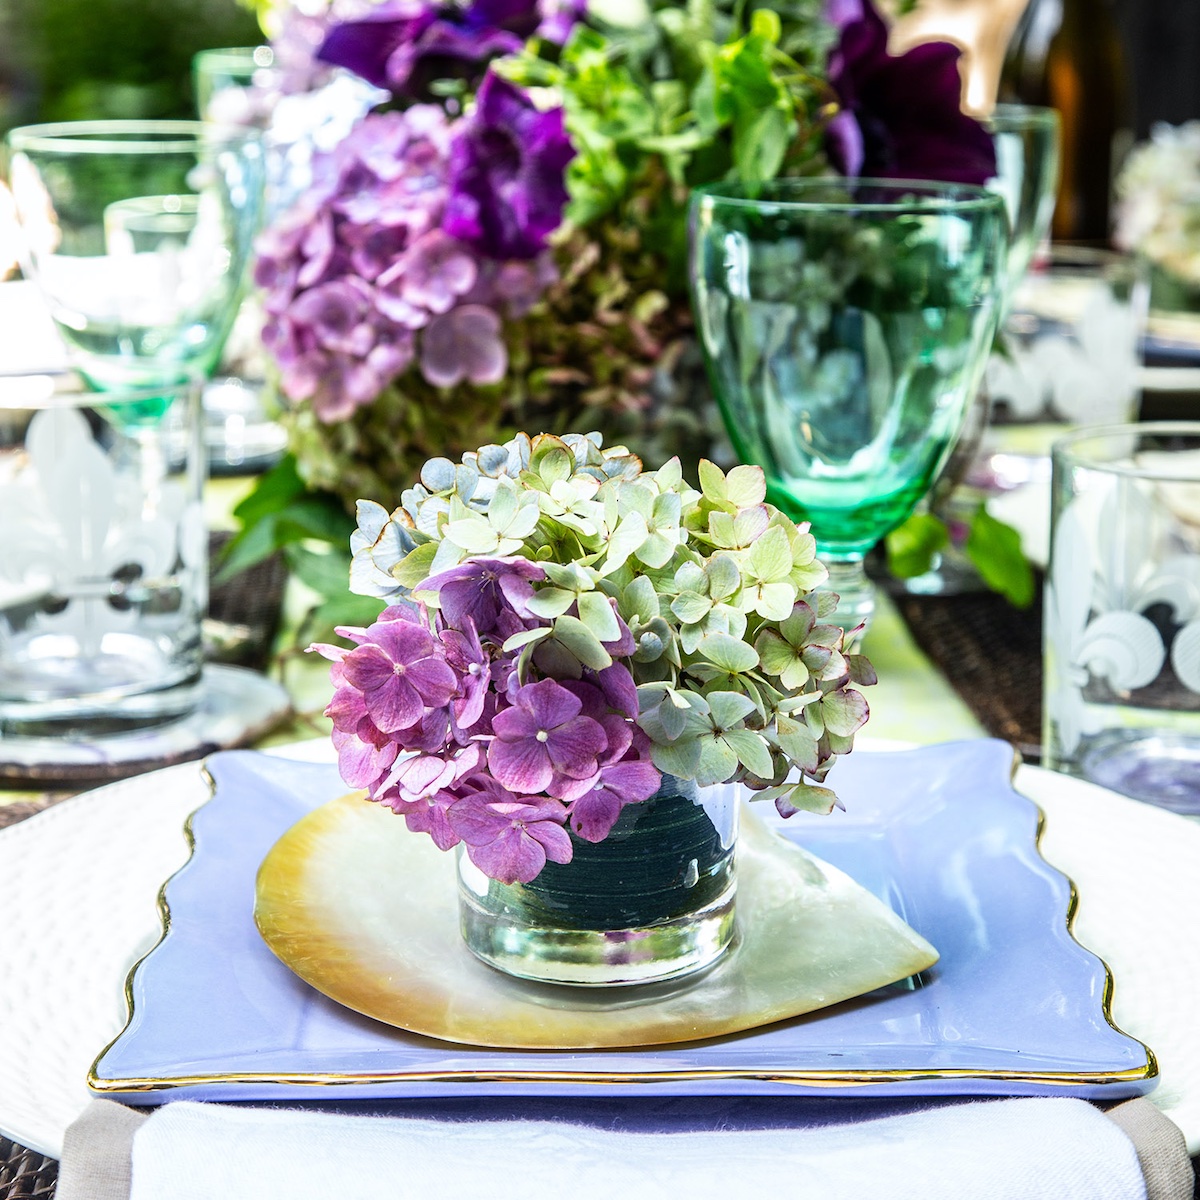 Single place setting with a disparate grouping of china and glassware, topped with a small arrangement of hydrangea blossoms in a glass tumbler.